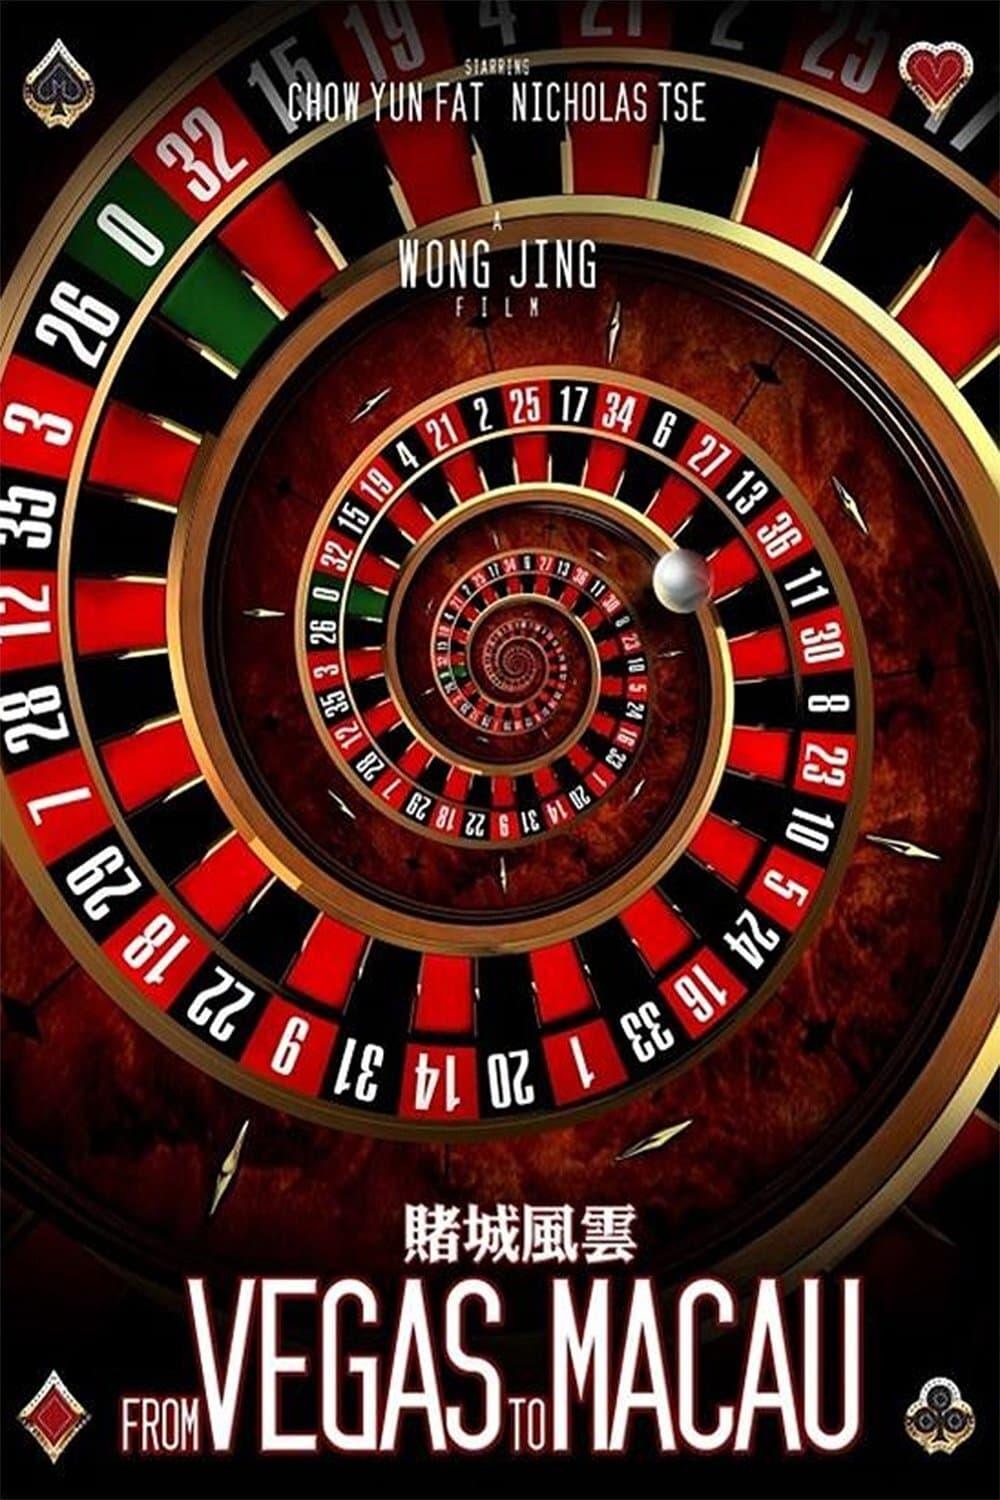 From Vegas to Macau poster